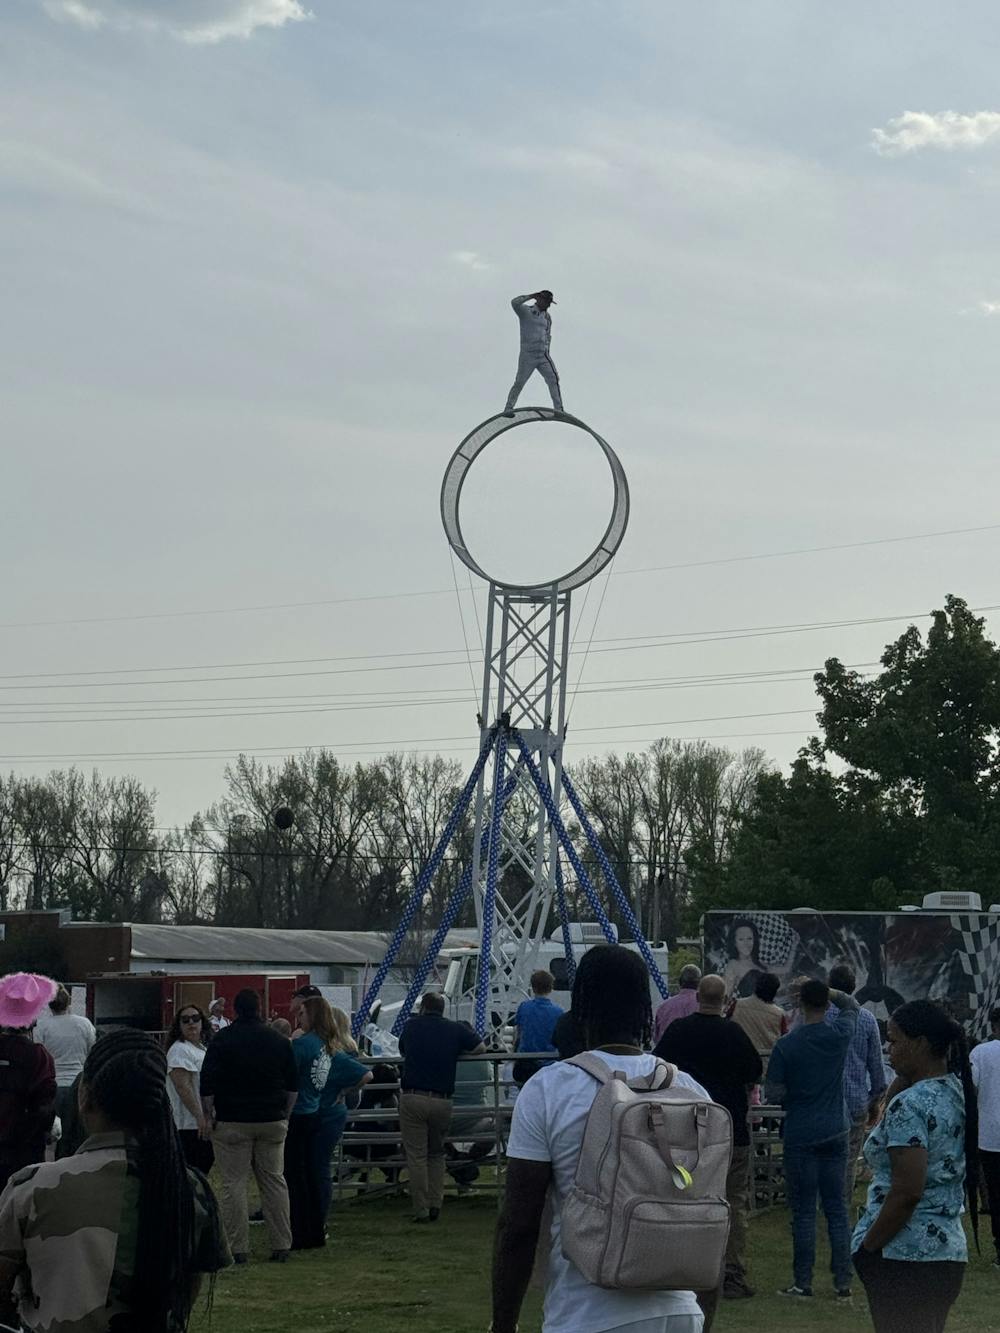 An acrobat balances on top of his spinning hoop act at the Cherry Blossom Fair in Macon.